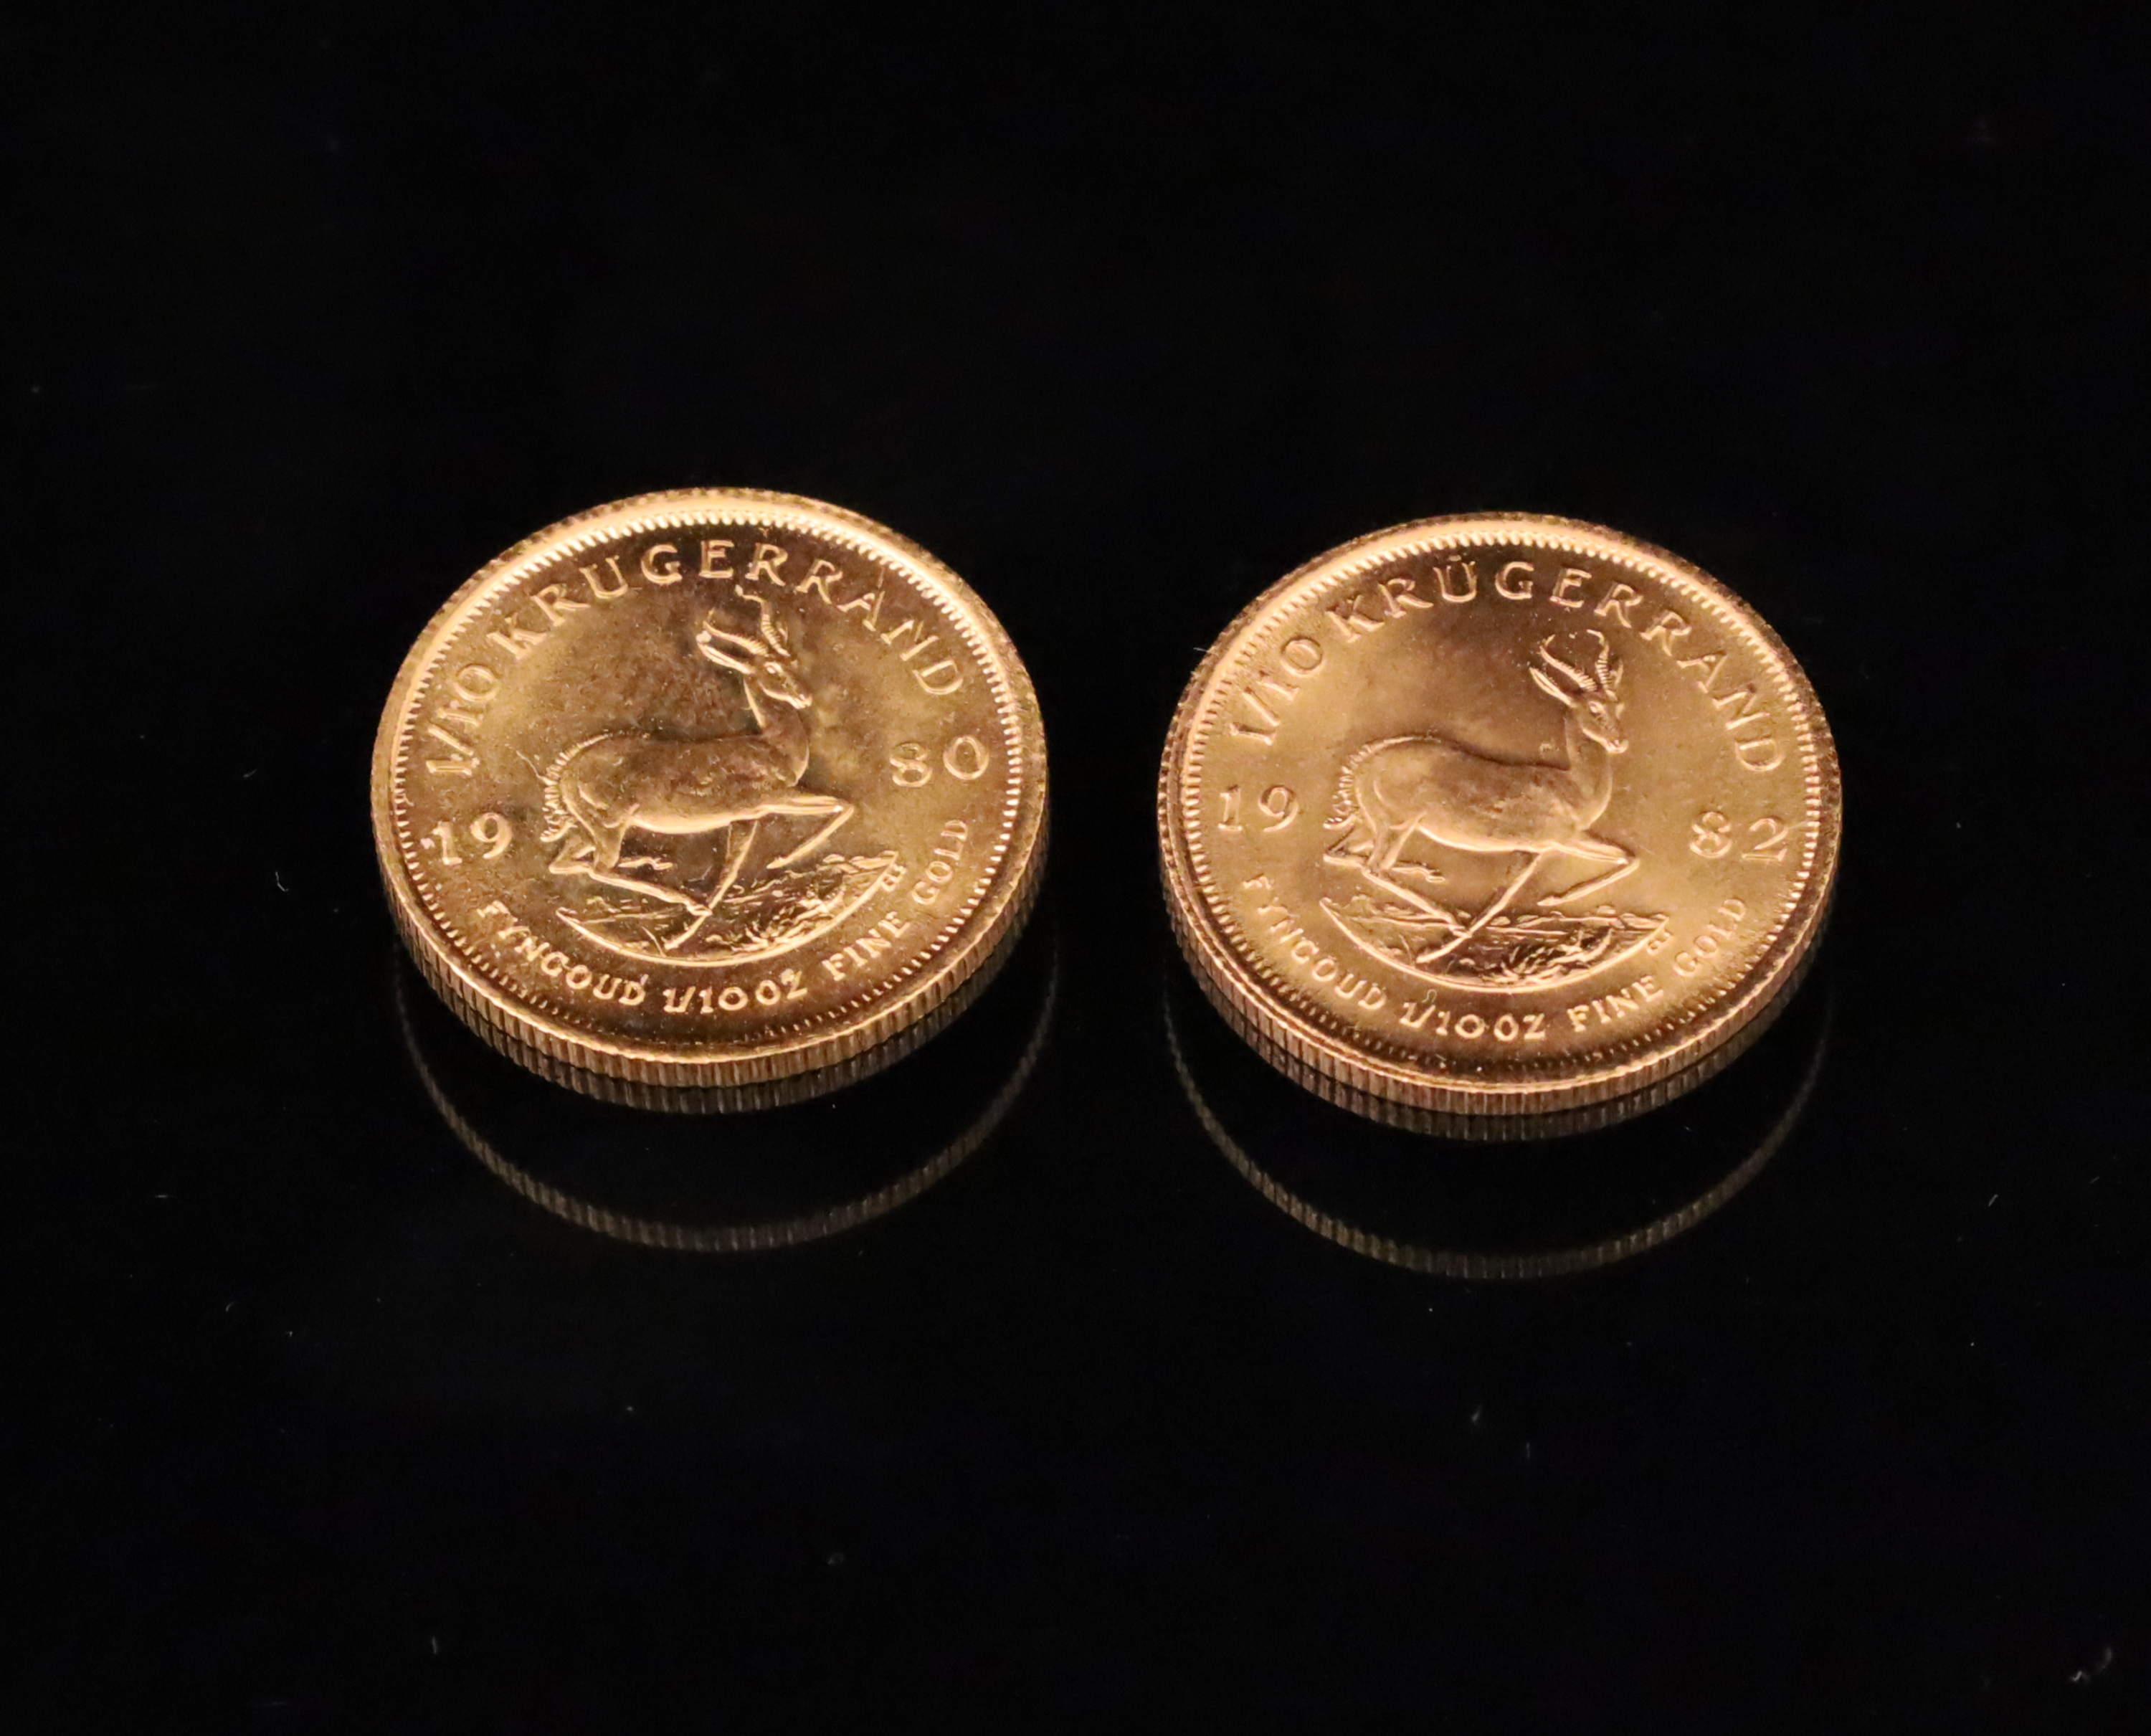 TWO 1/10 OUNCE FINE GOLD KRUGERAND